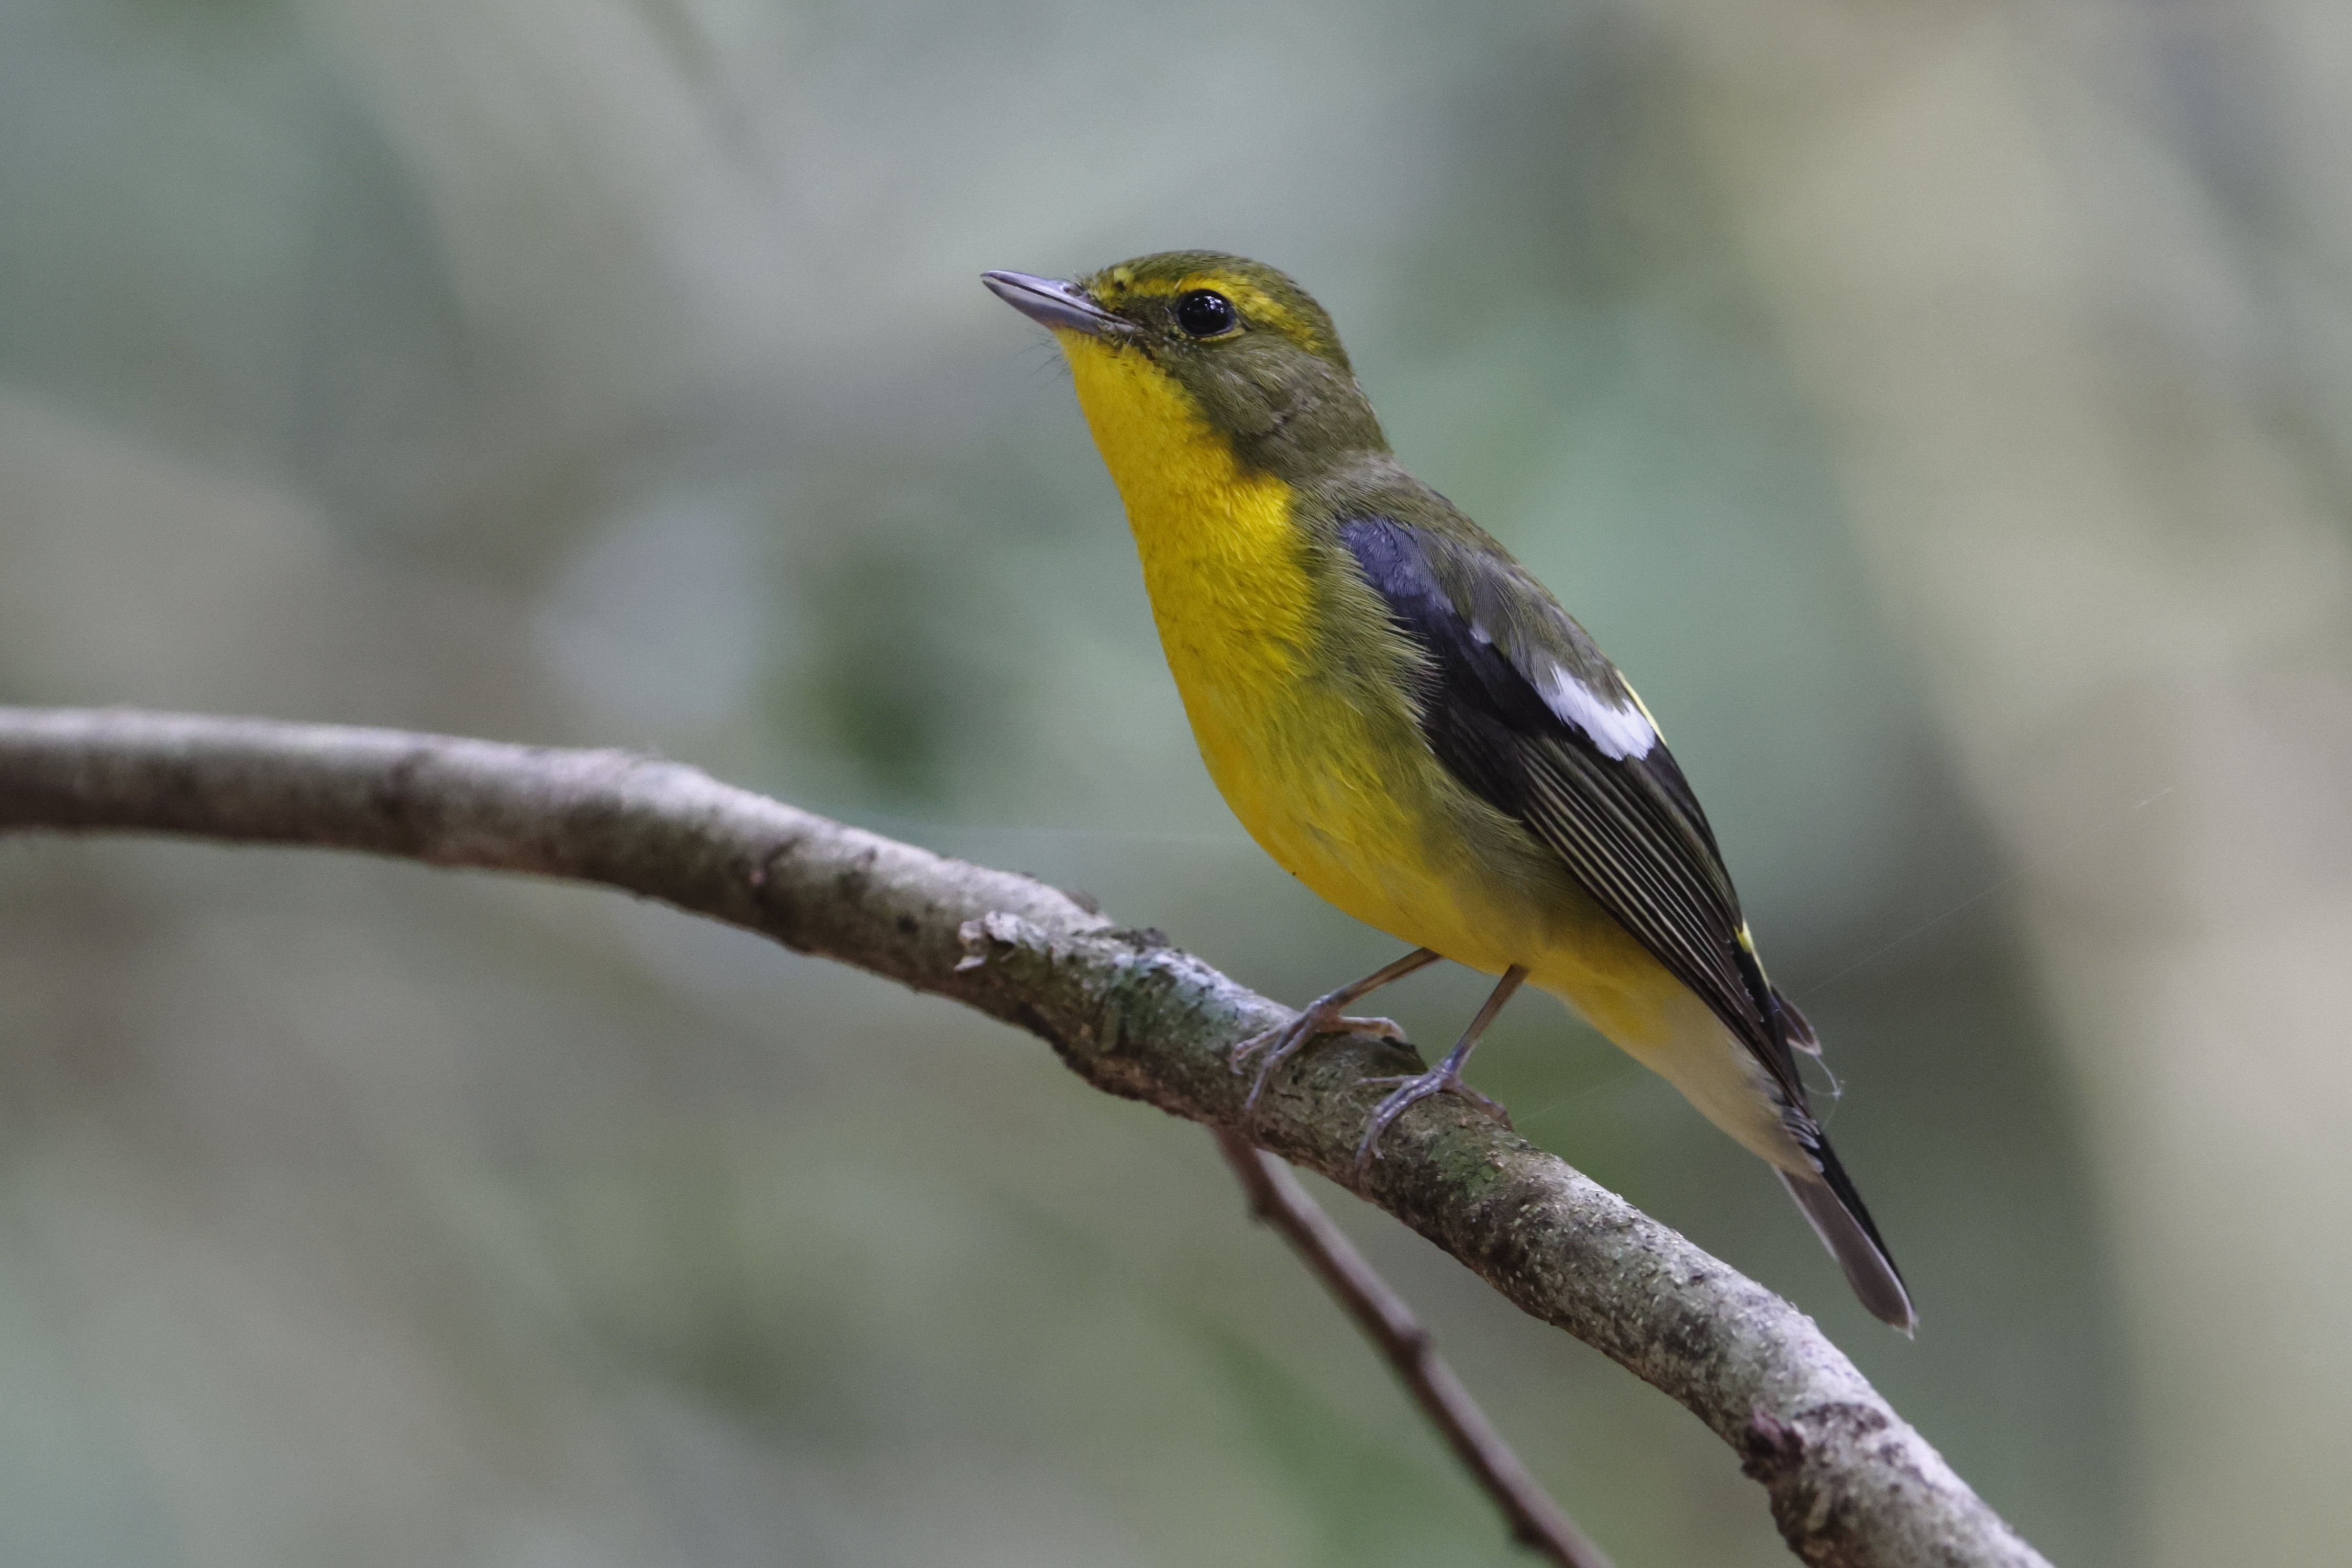 Green-backed Flycatcher at Dairy Farm Nature Park on 21 Apr 2023. Photo credit: Keita Sin